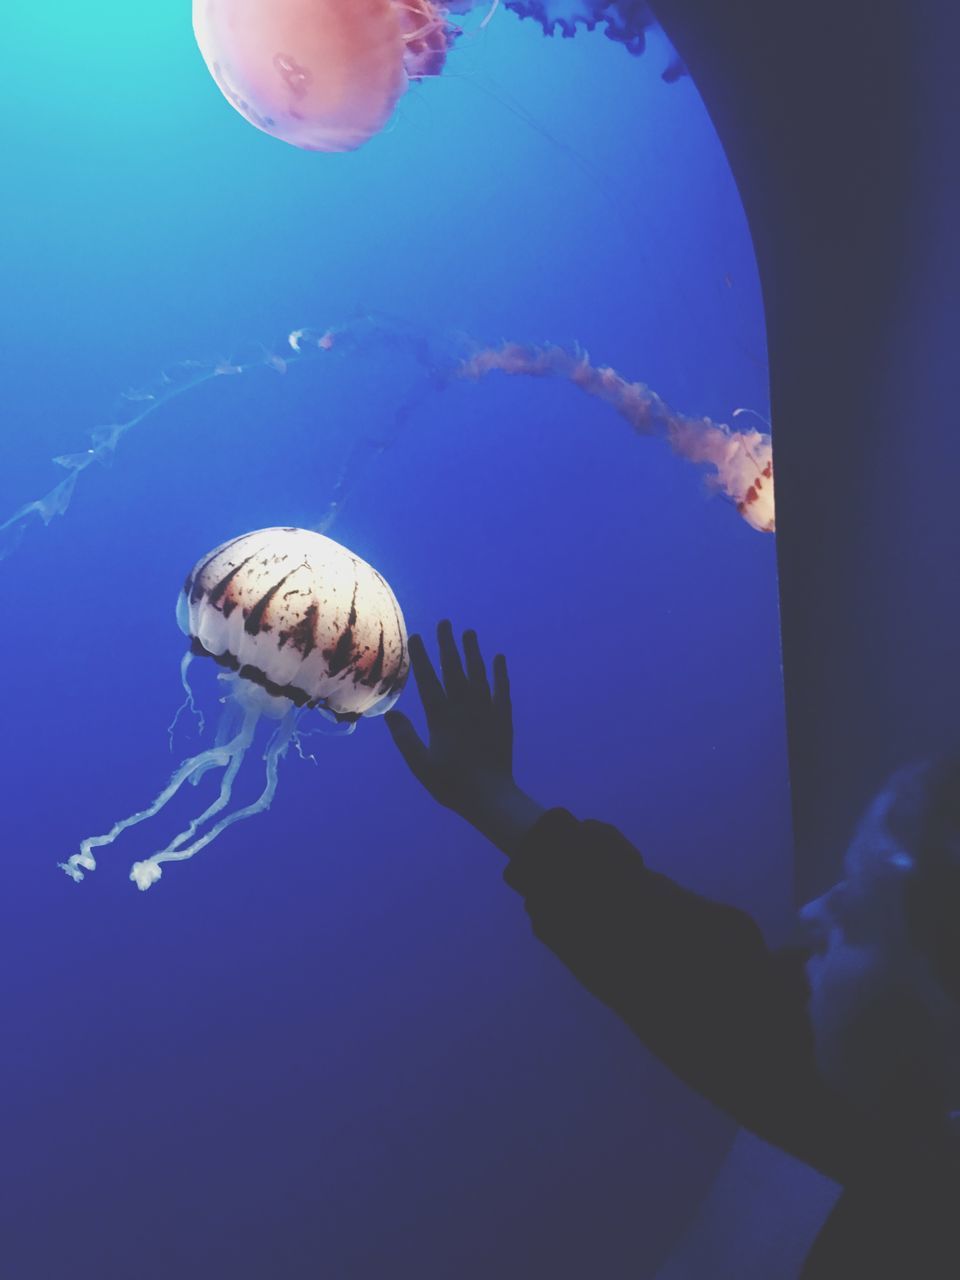 sea life, swimming, animal themes, water, underwater, animals in the wild, one animal, jellyfish, animal wildlife, animals in captivity, aquarium, nature, blue, floating in water, real people, beauty in nature, close-up, indoors, undersea, day, mammal